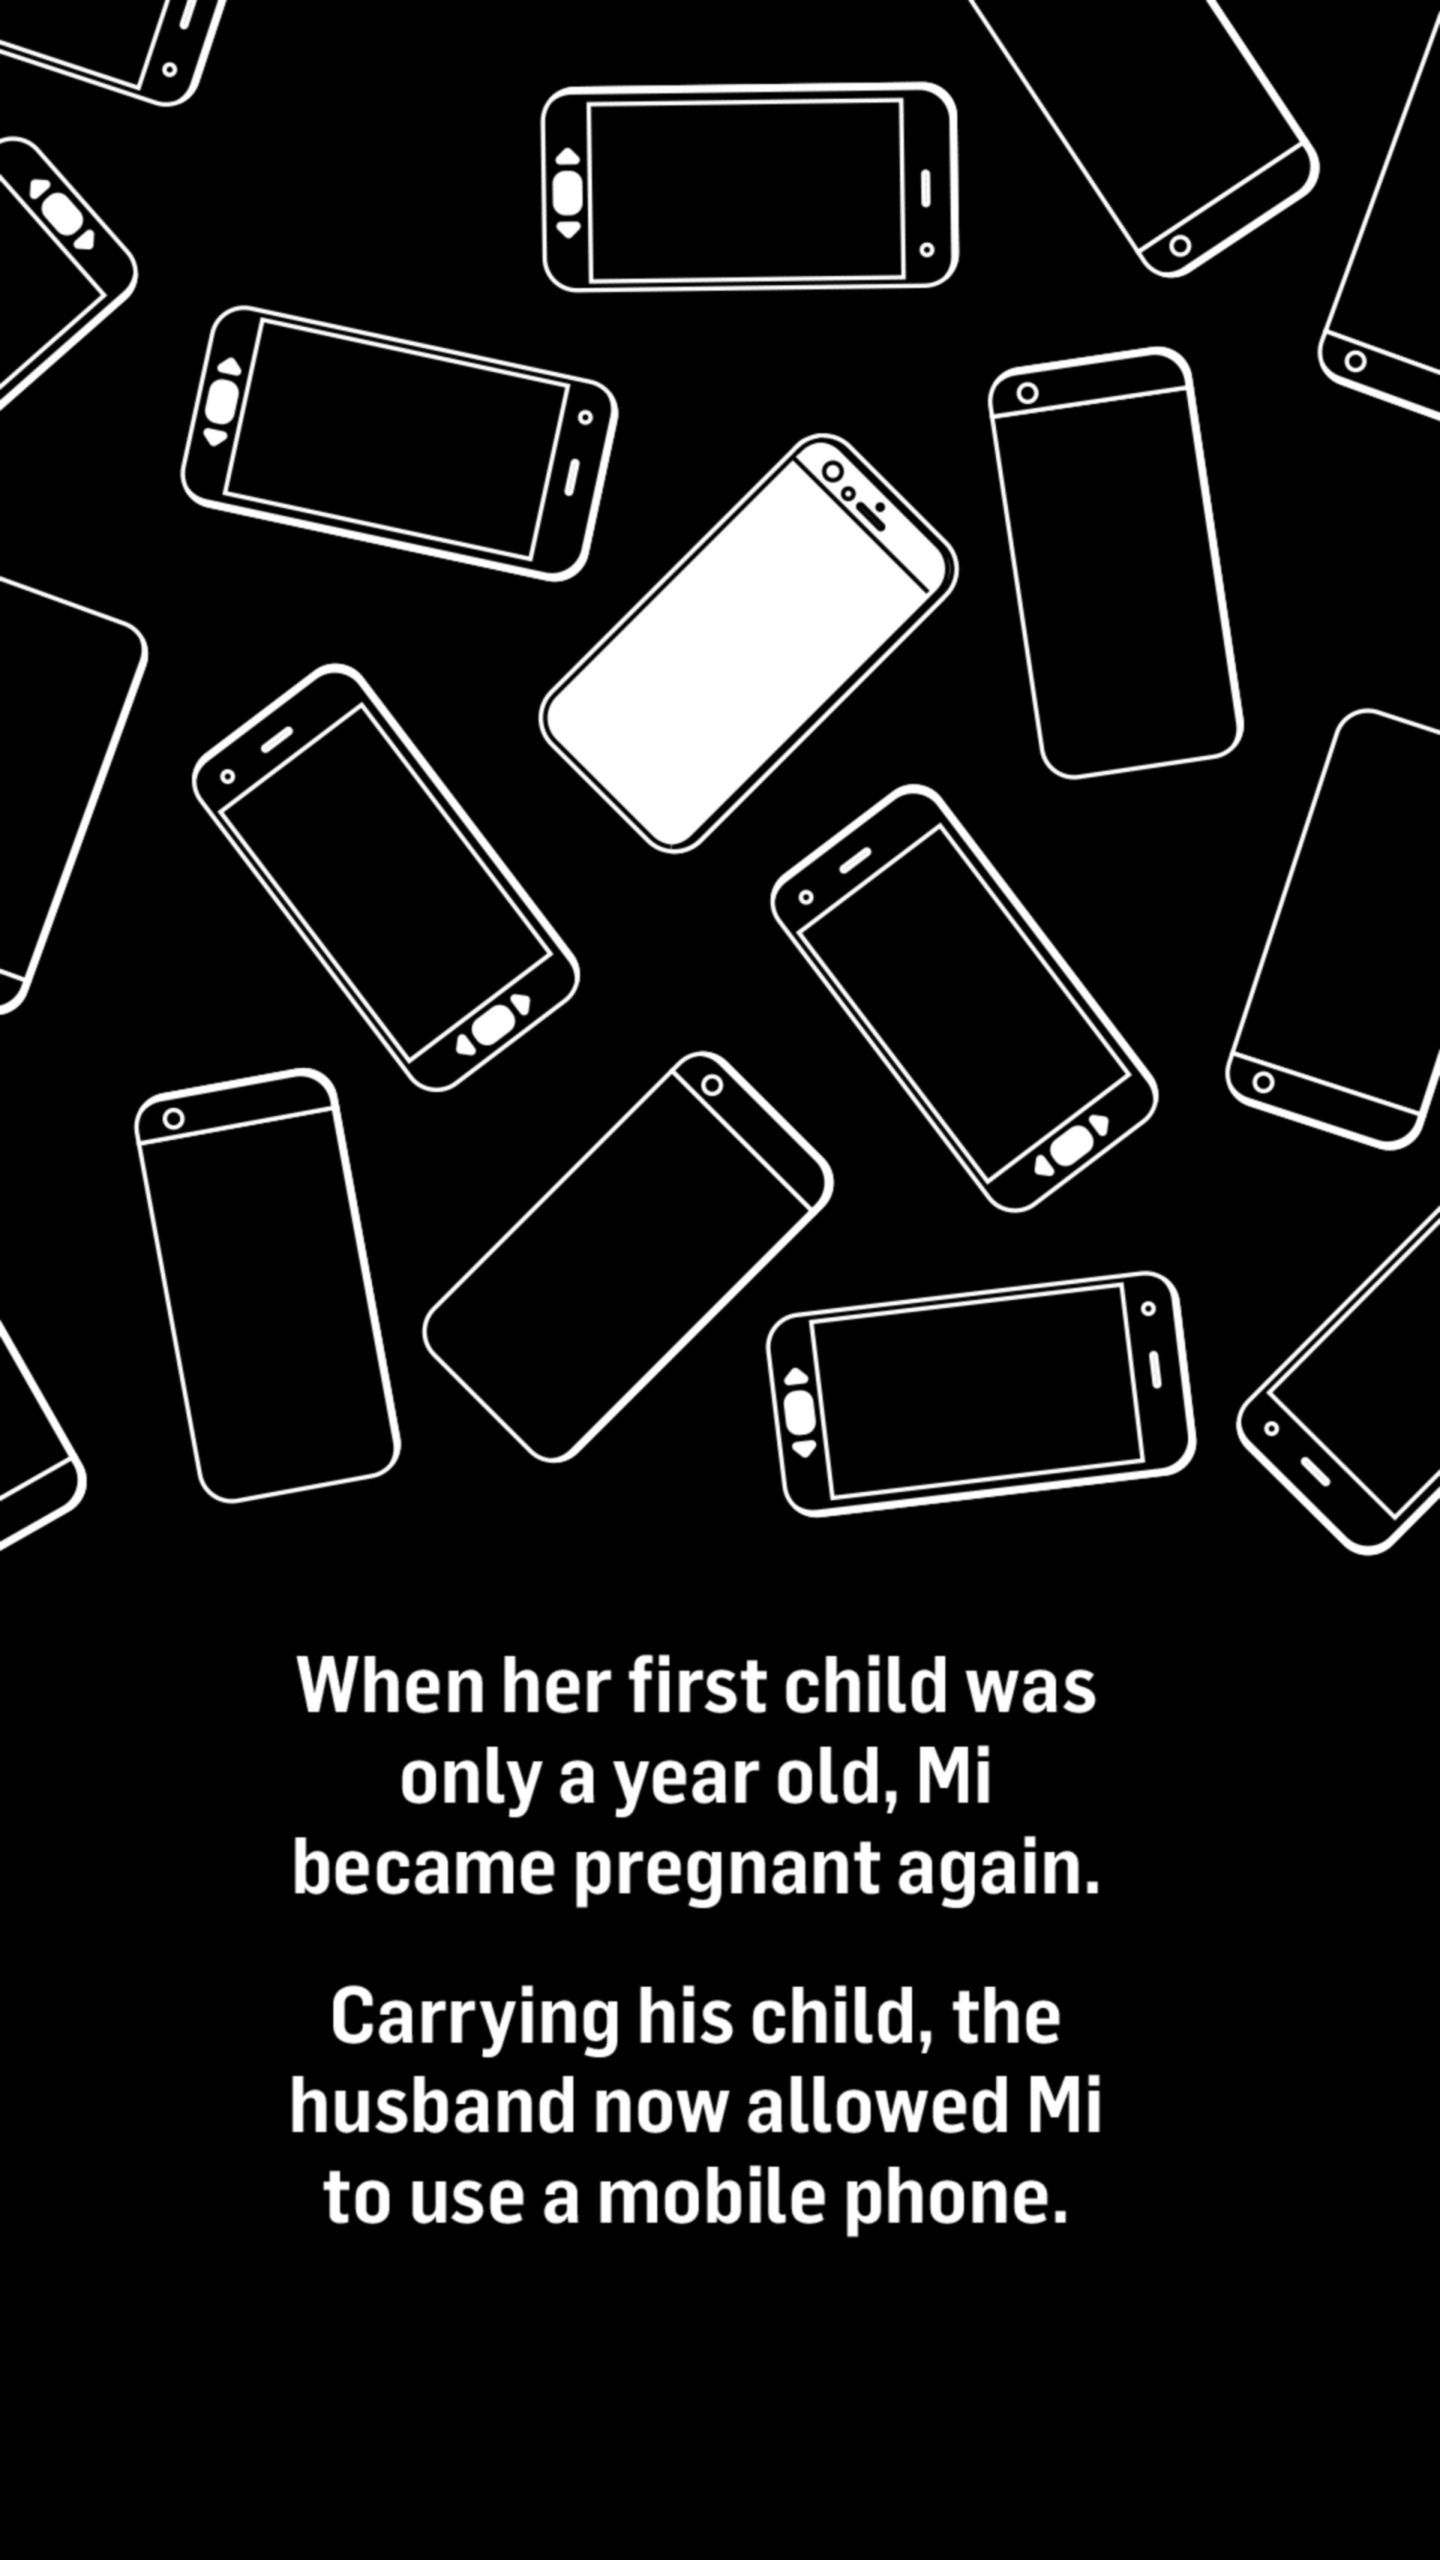 An illustration of mobile phones. Words below the image: When her first child was only a year old, Mi became pregnant again.

Carrying his child, the husband now allowed Mi to use a mobile phone.